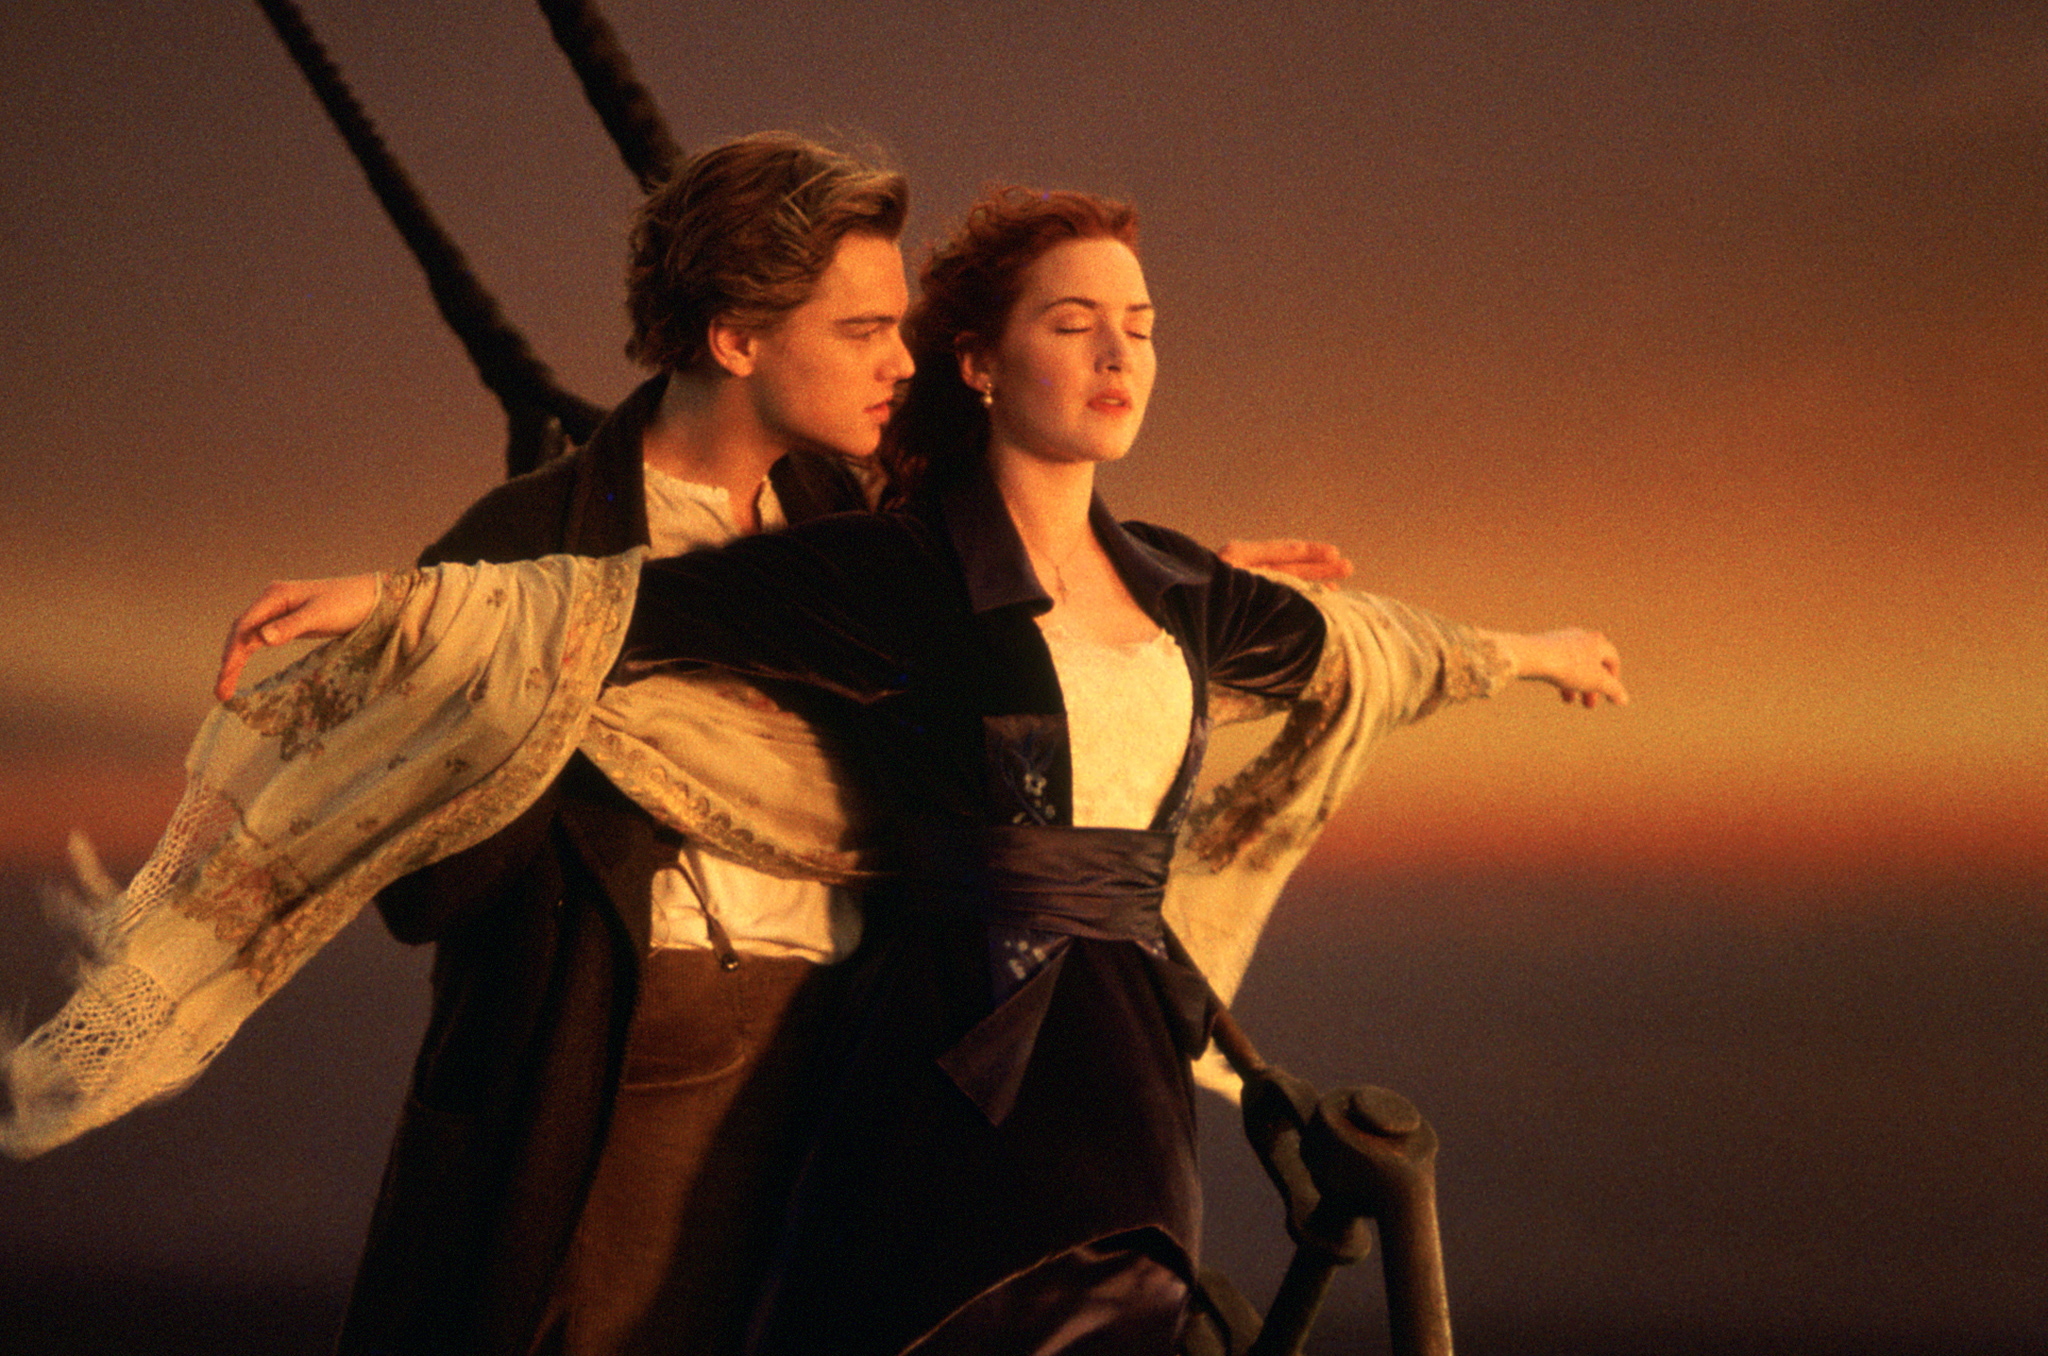 Hollywood News: The Shocking Pay Discrepancy in Titanic - How Leonardo DiCaprio Earned $37.5 Million More Than Kate Winslet